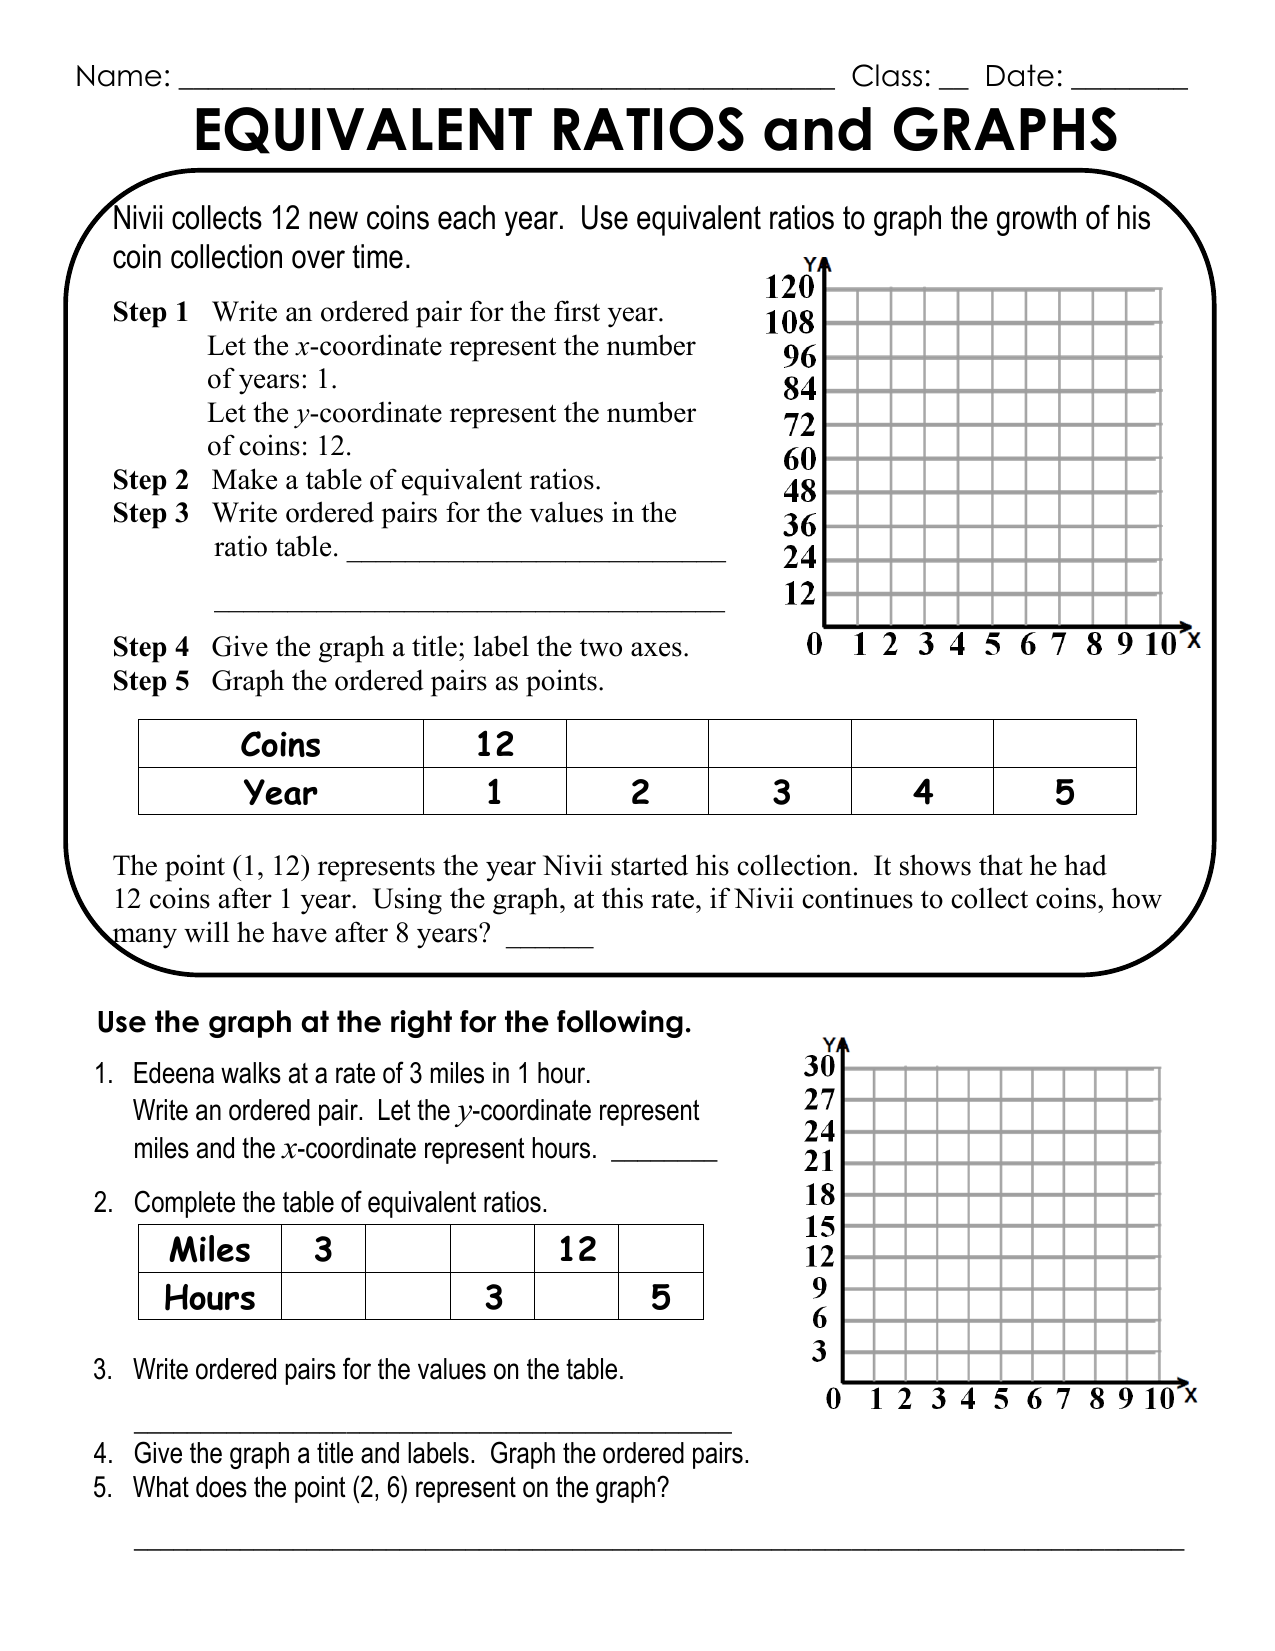 graphing-ratios-practice-problems-28lr5g6